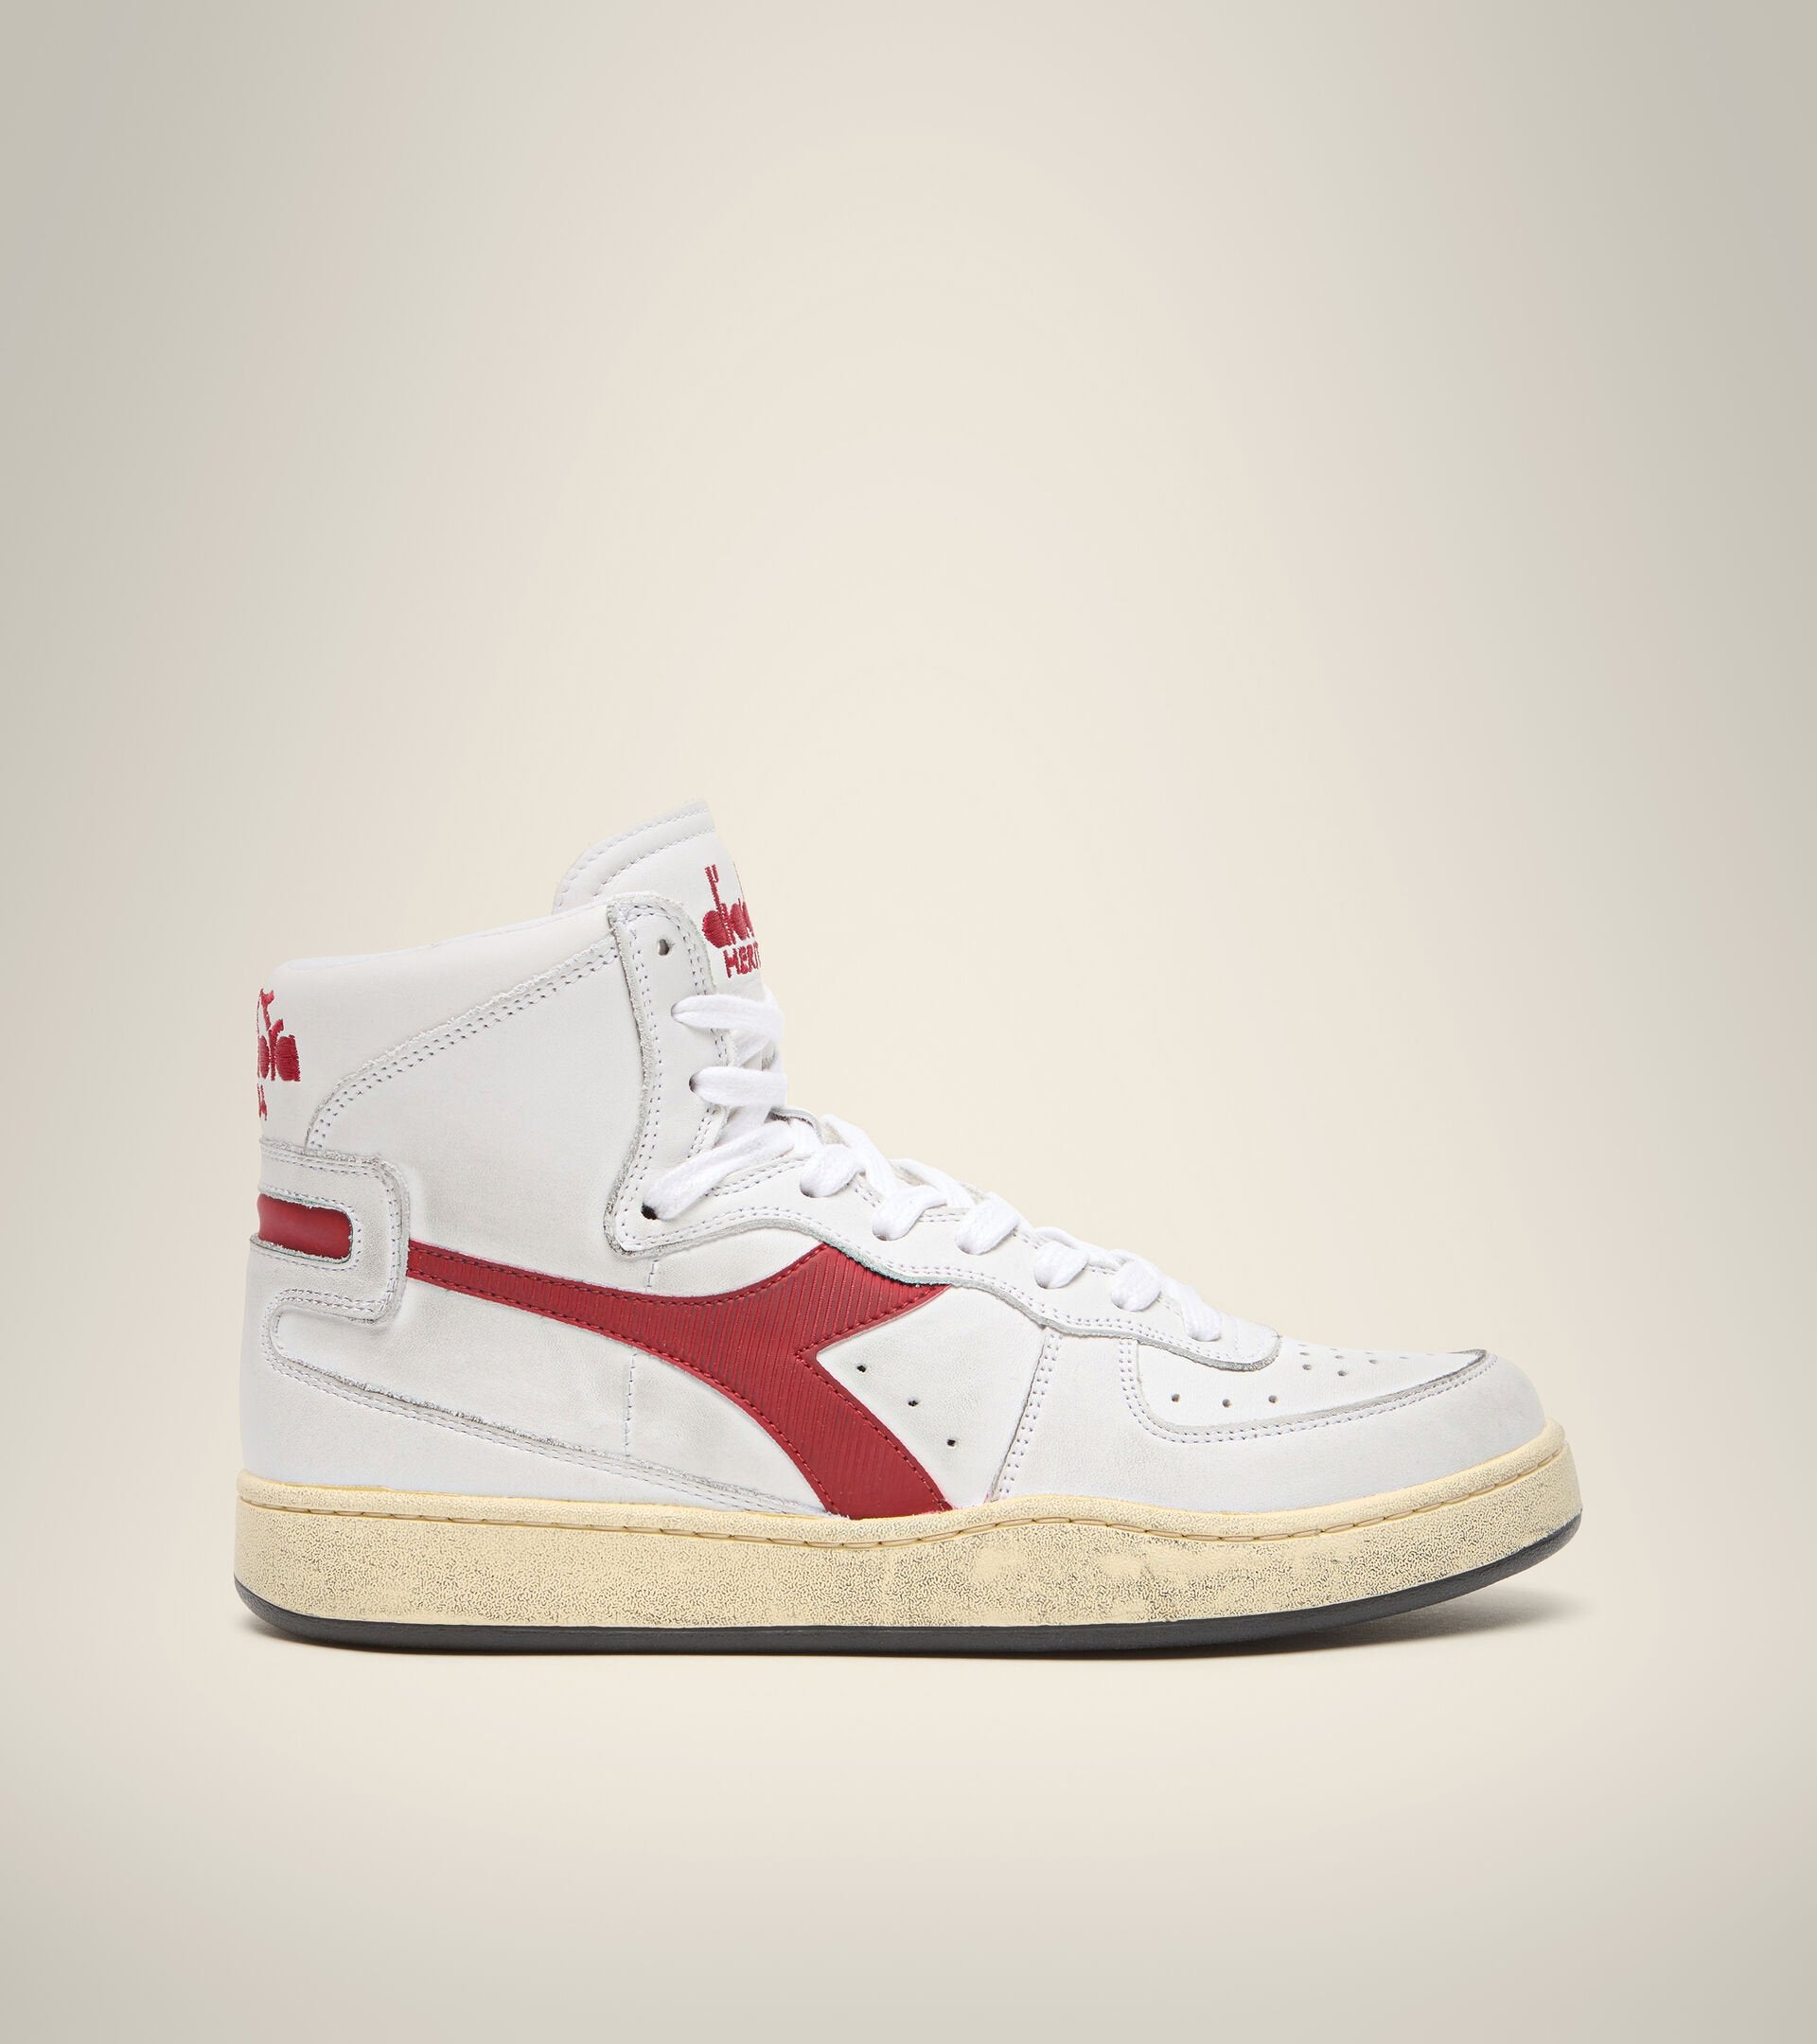 side view of diadora white mi basket used shoe with red stripe